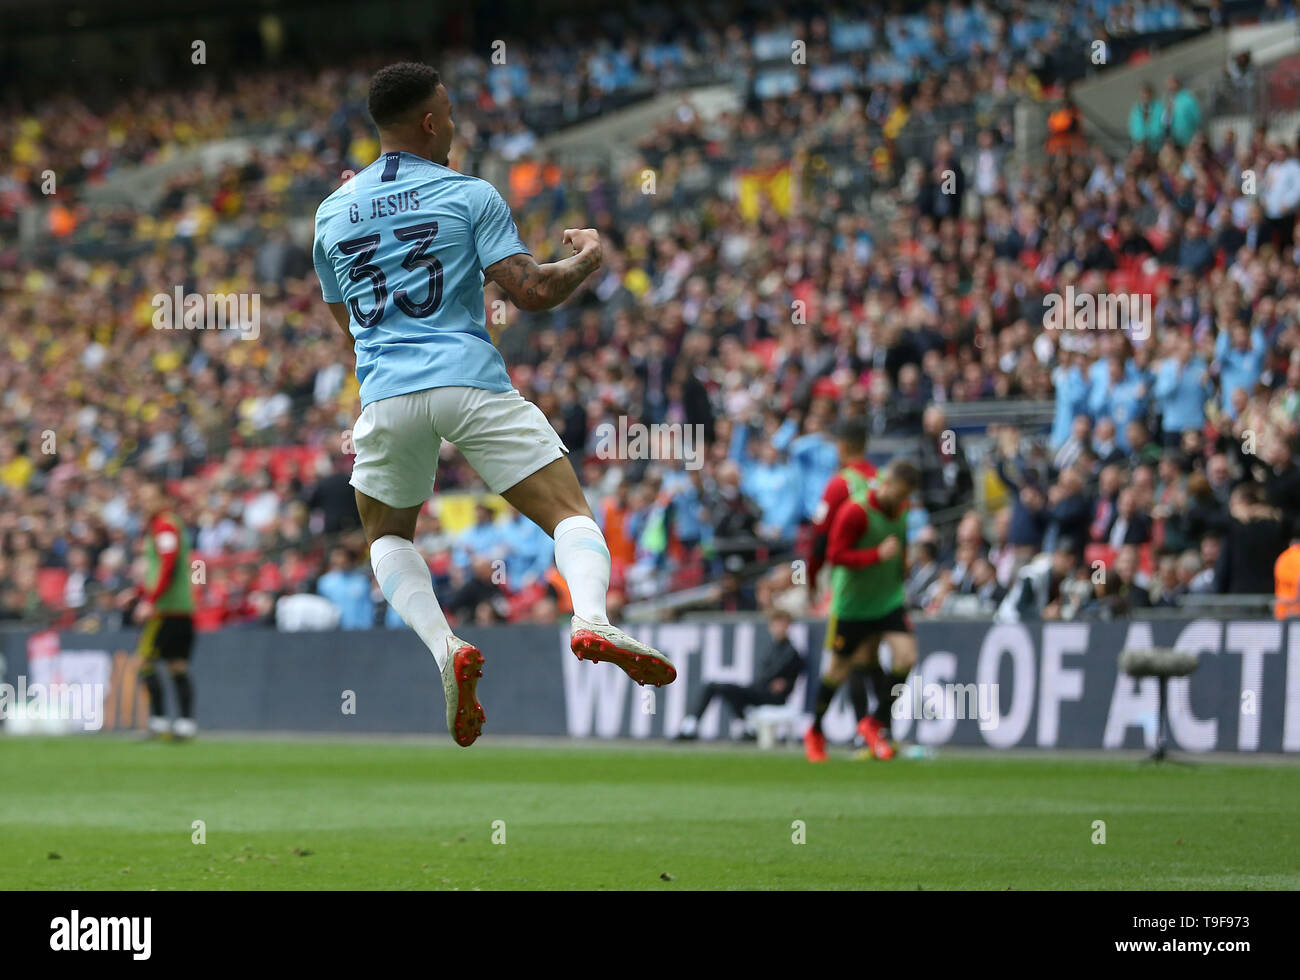 London, UK. 18 May 2019 Manchester City's Gabriel Jesus celebrates to make it 4-0 during the Emirates FA Cup Final between Manchester City and Watford at the Wembley Stadium in London. 18 May 2019. EDITORIAL USE ONLY. No use with unauthorized audio, video, data, fixture lists, club/league logos or 'live' services. Online in-match use limited to 120 images, no video emulation. No use in betting, games or single club/league/player publications. Credit: James Boardman / Alamy Live News Stock Photo